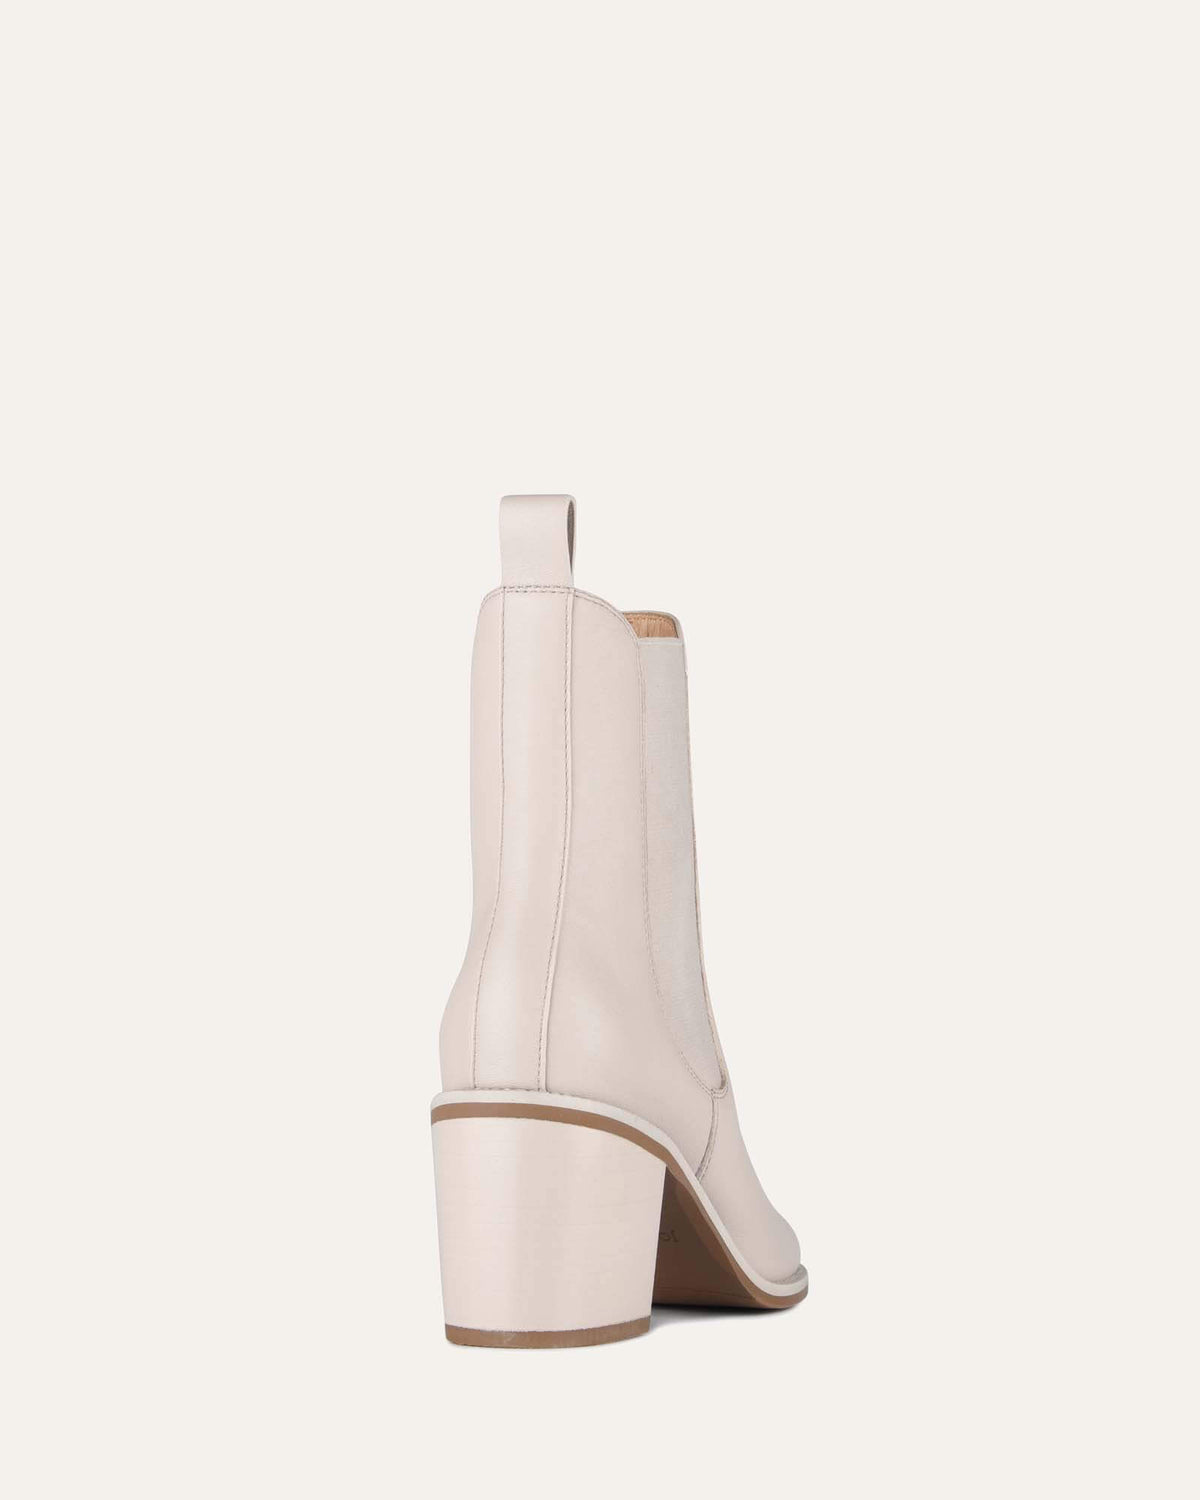 MARLOWE MID ANKLE BOOTS BONE LEATHER